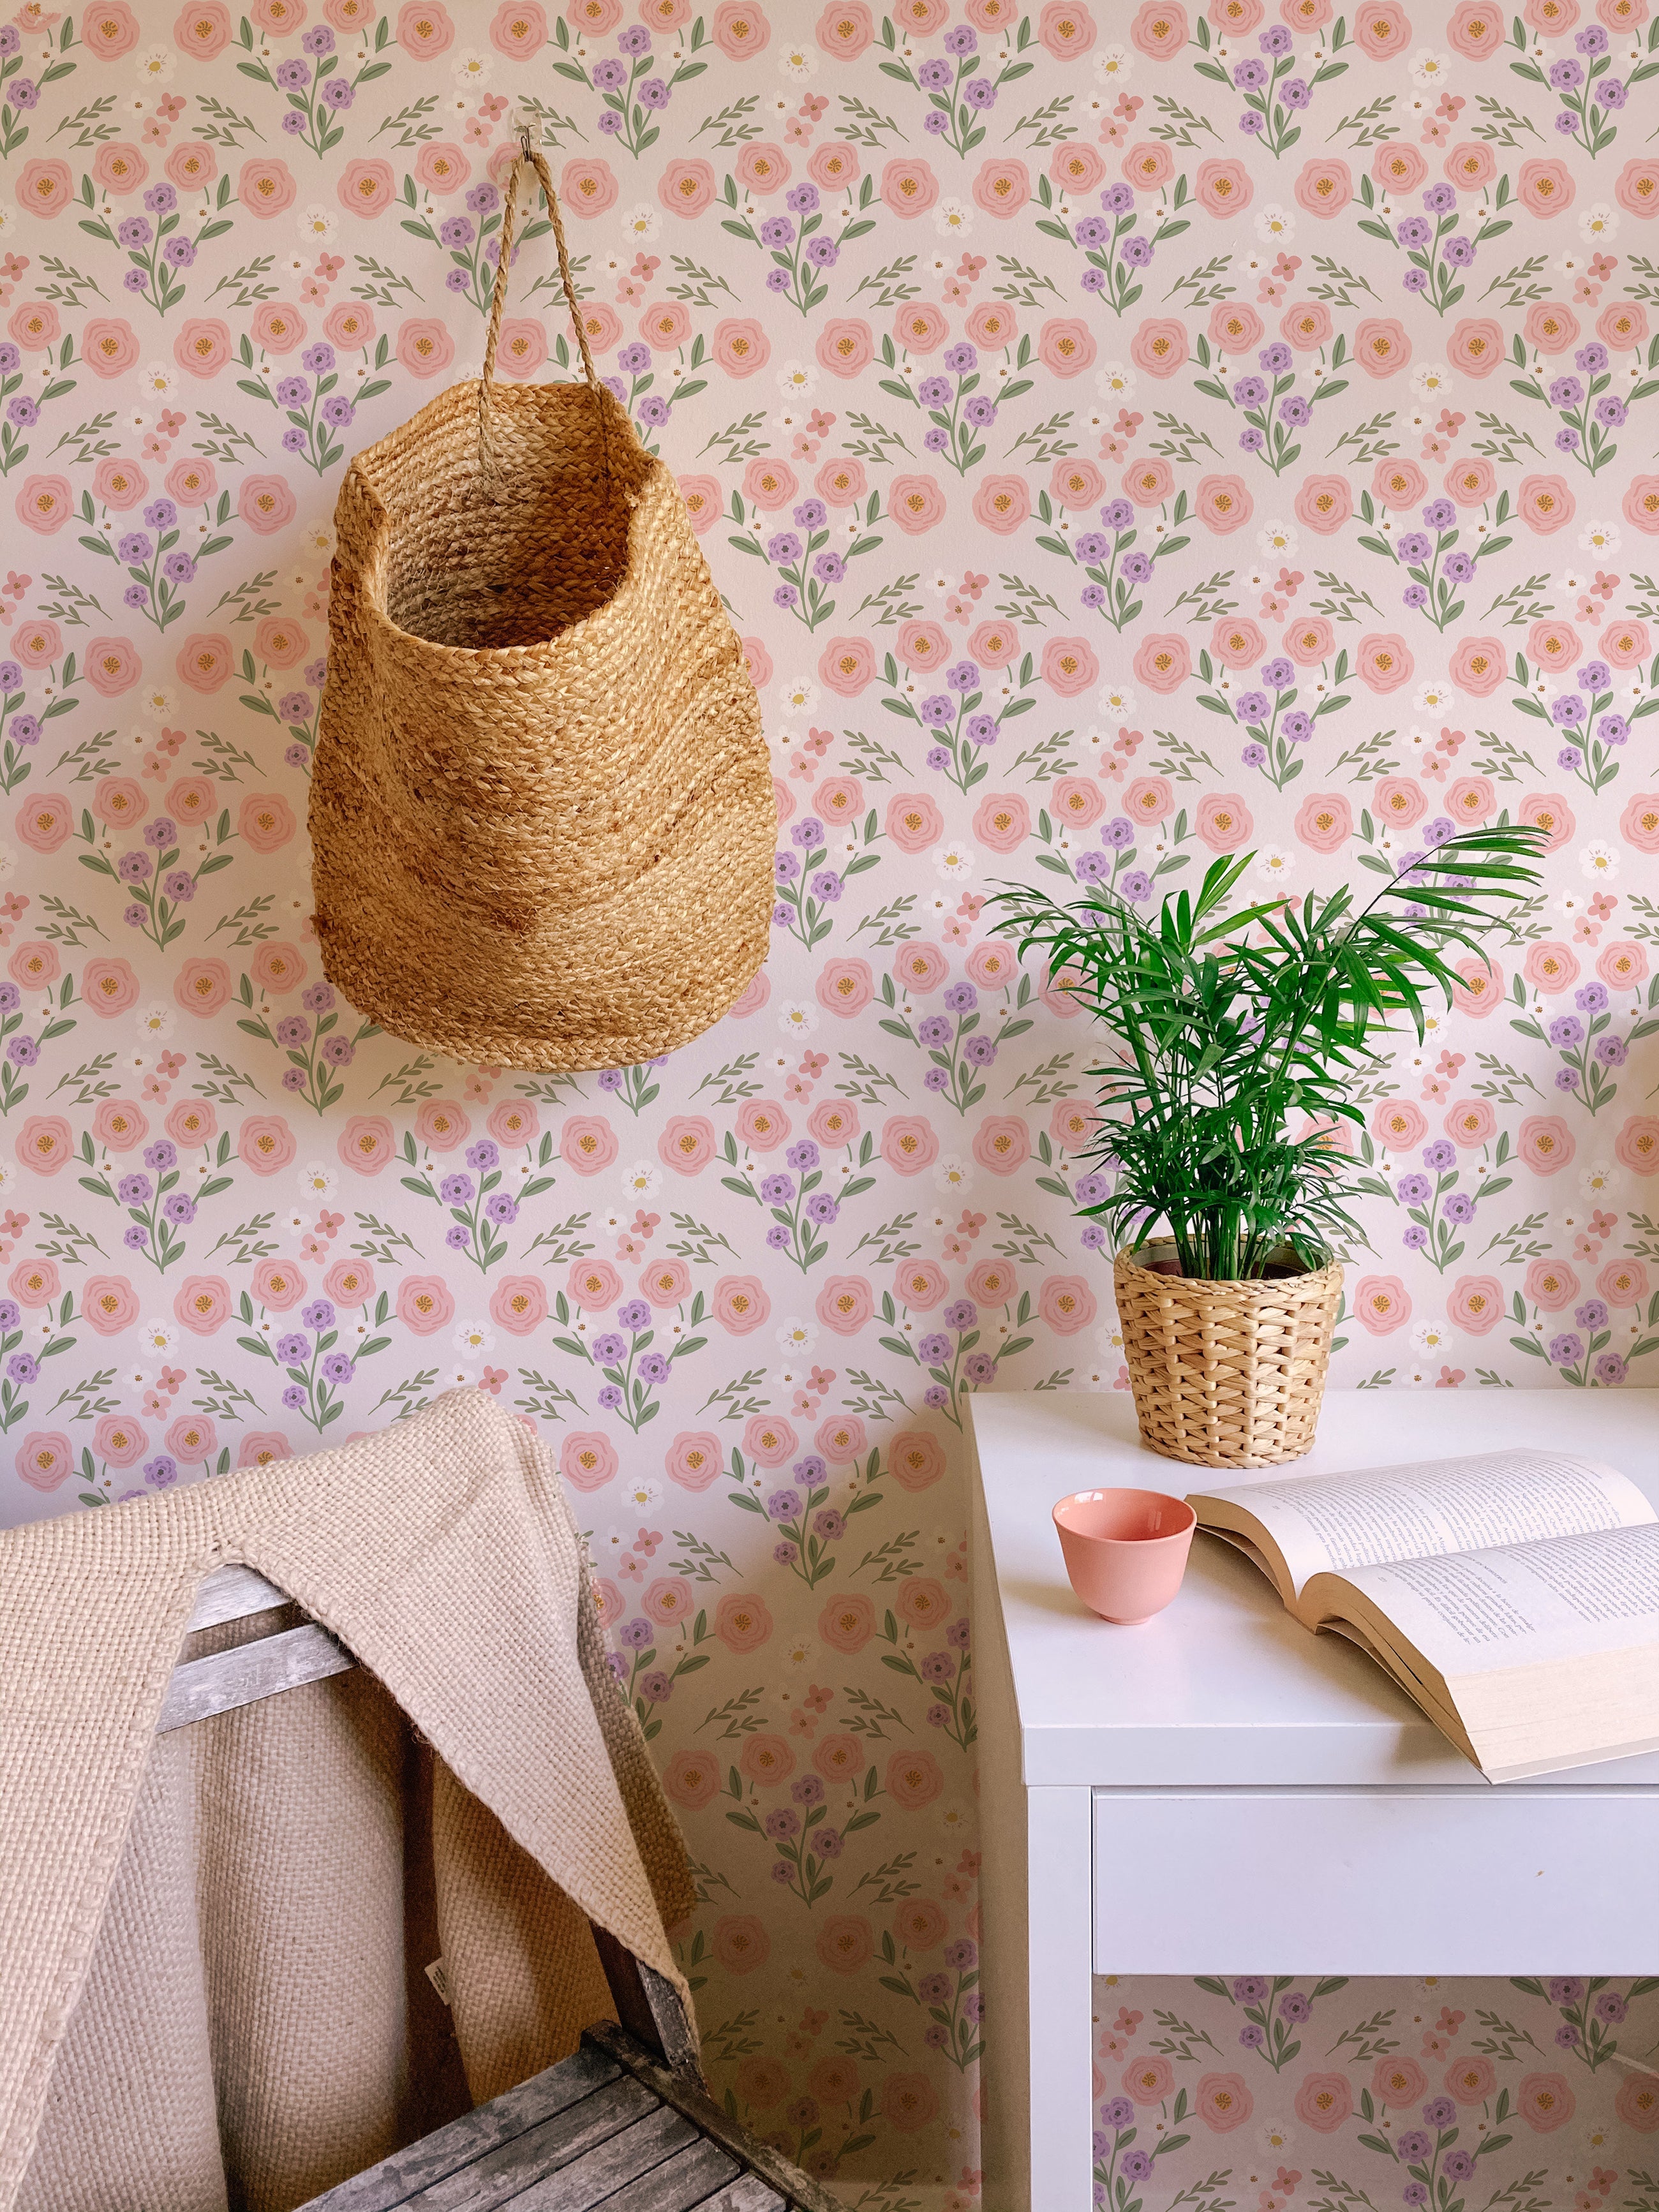 A cozy reading corner enhanced by Fredlig Flowers Wallpaper, which covers the walls with its cheerful pattern of pink roses and purple flowers. A natural wicker basket hangs from the ceiling, complementing the botanical theme alongside a potted green plant and a book on a white desk, providing a peaceful retreat.